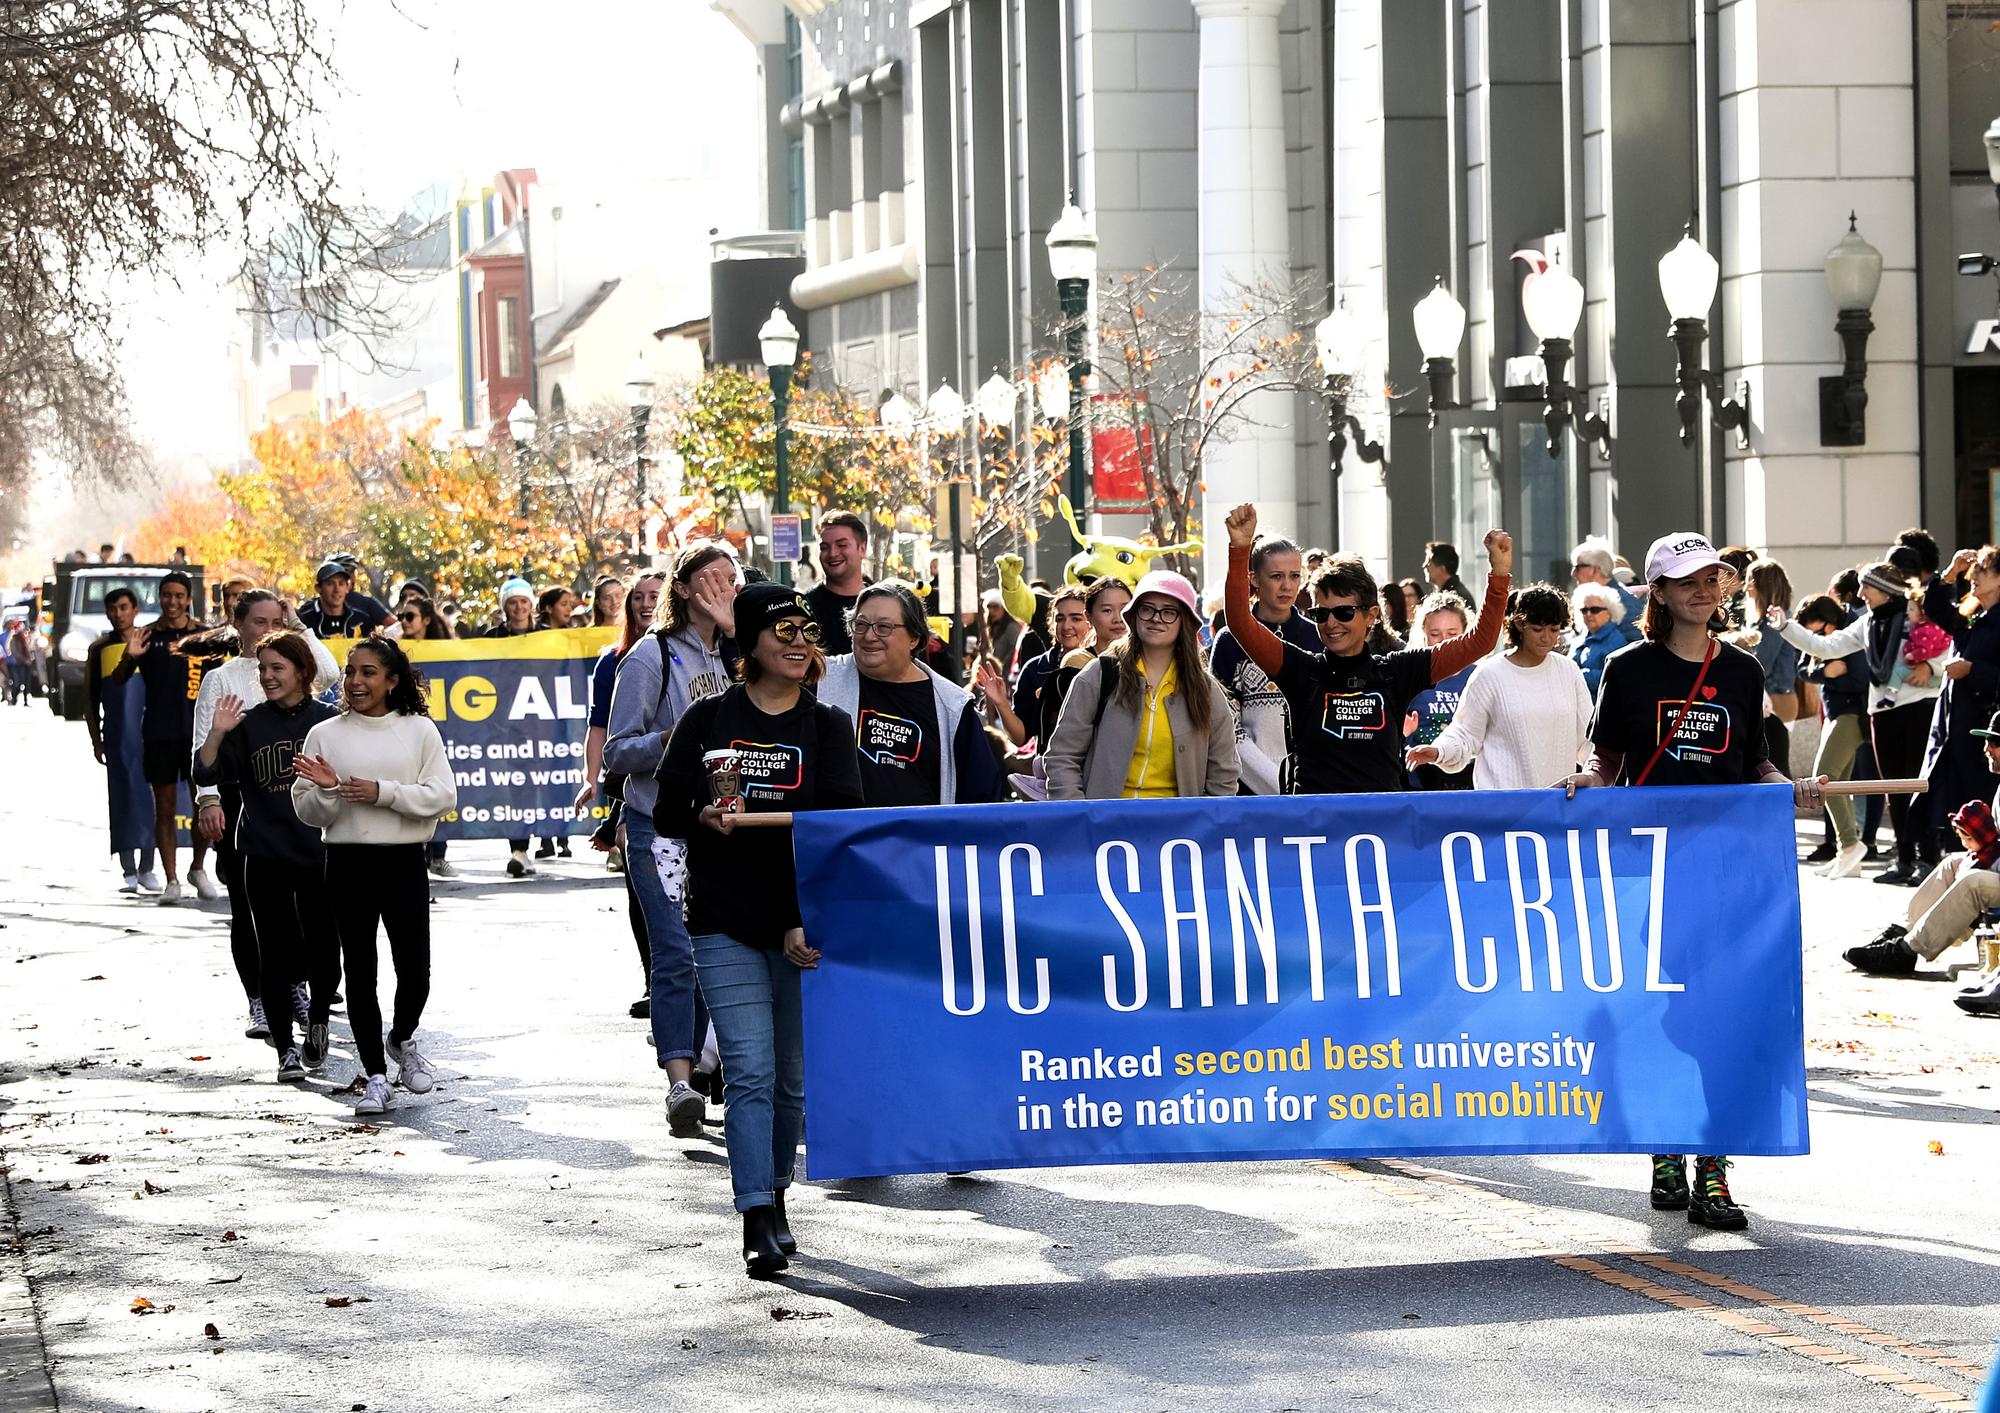 Students, staff and chancellor marching in holiday day parade in downtown Santa Cruz.